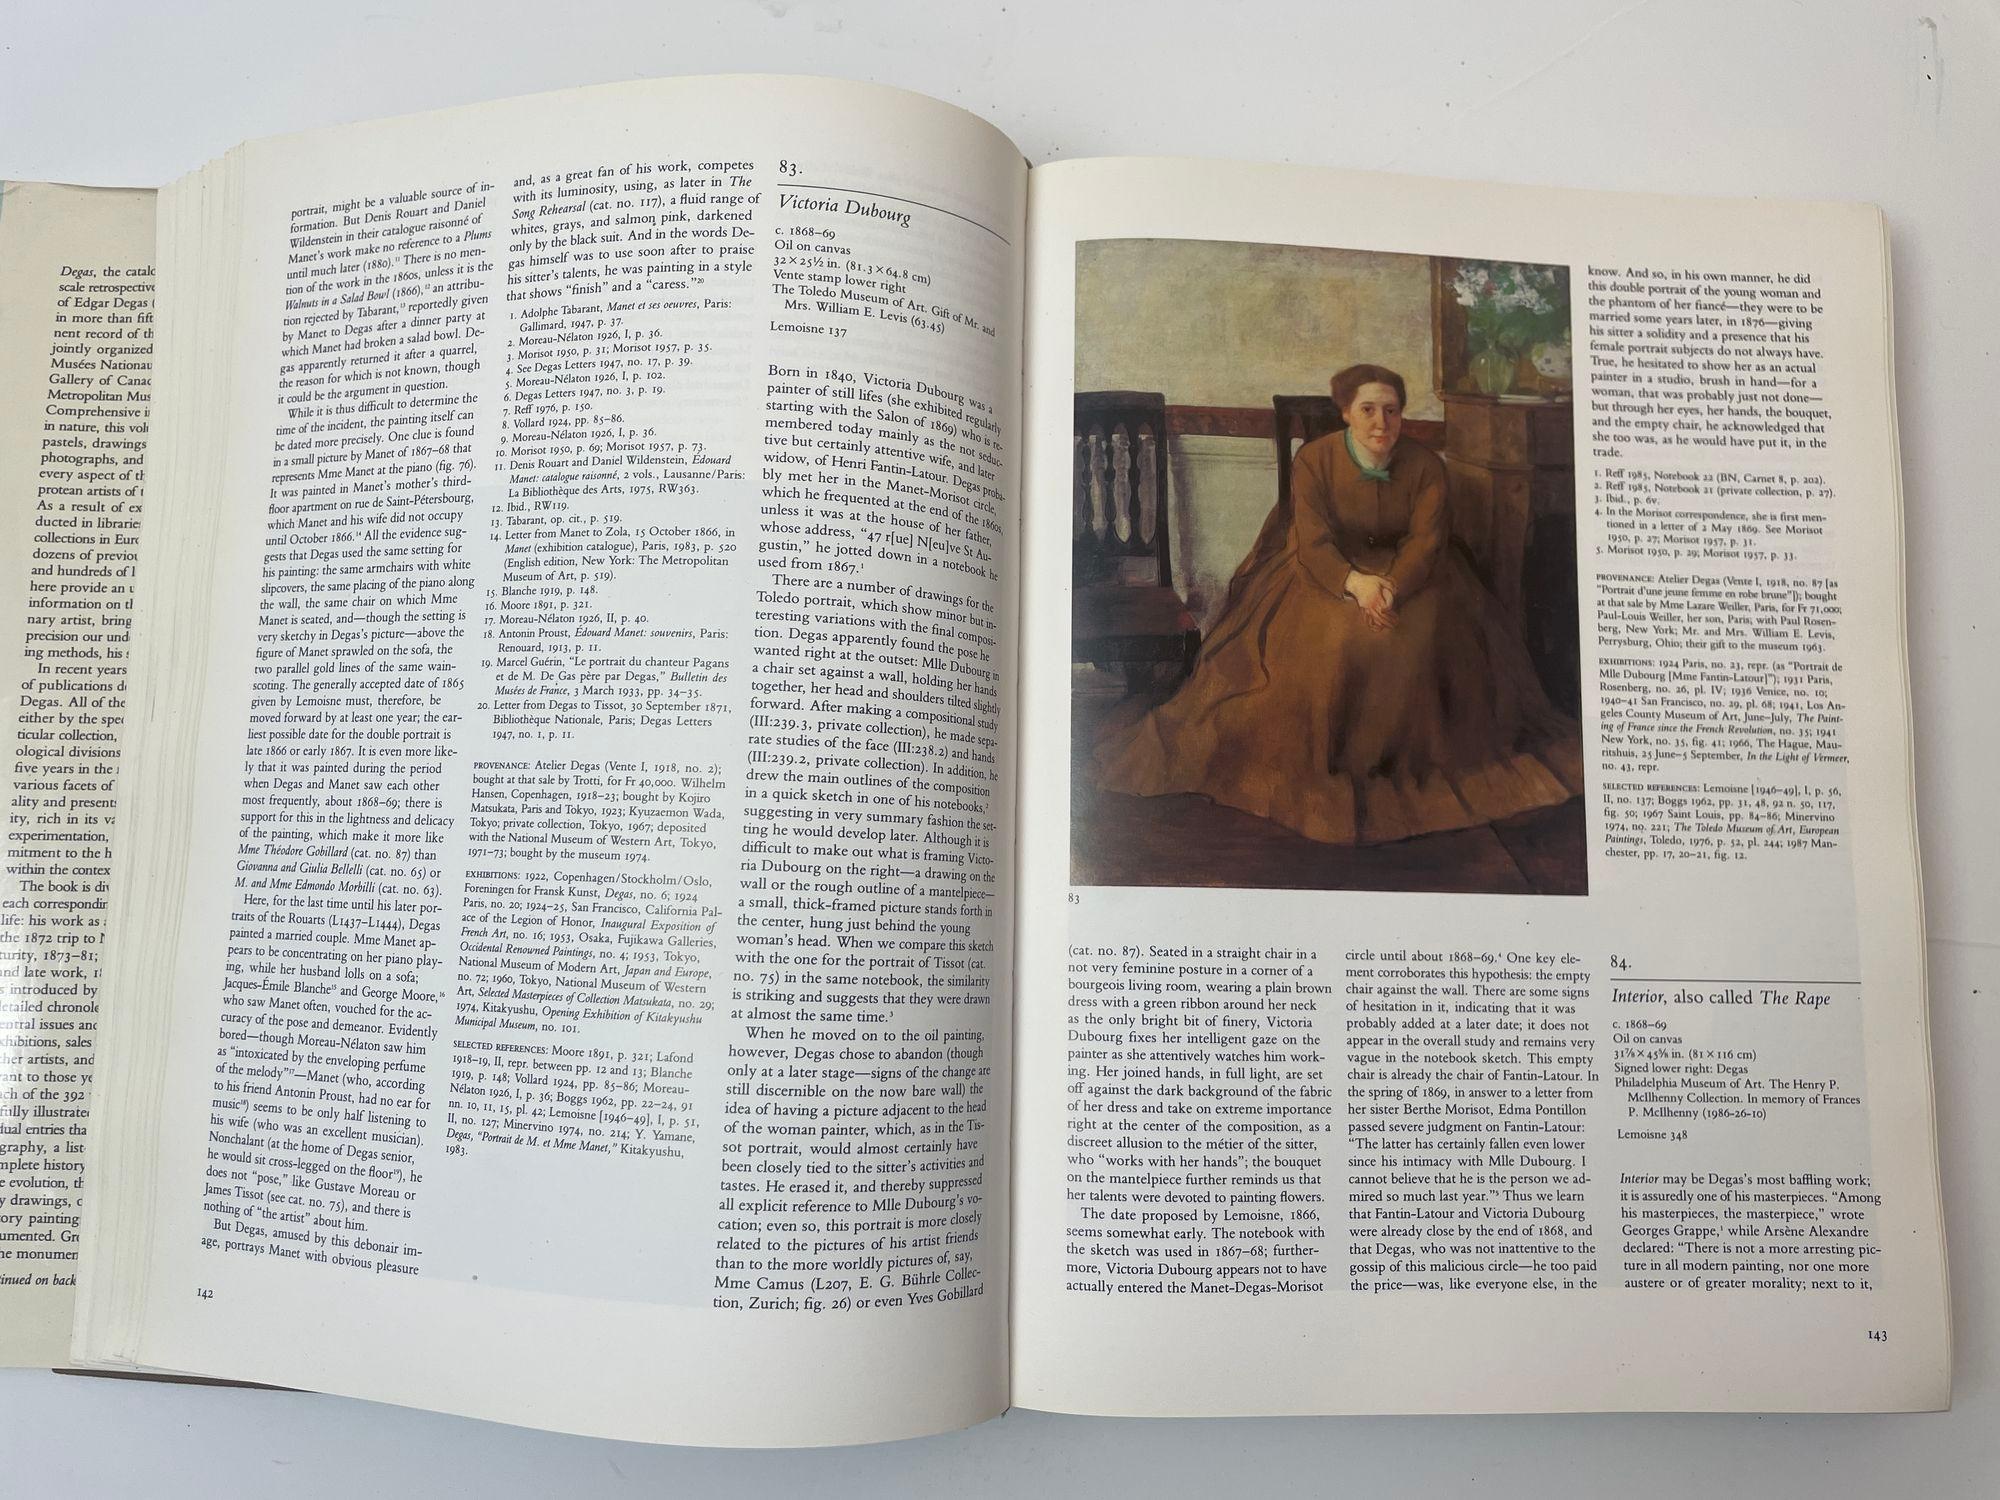 Paper Degas by Jean Sutherland Boggs Hardcover Book Met Museum of Art 1st Ed. 1988 For Sale